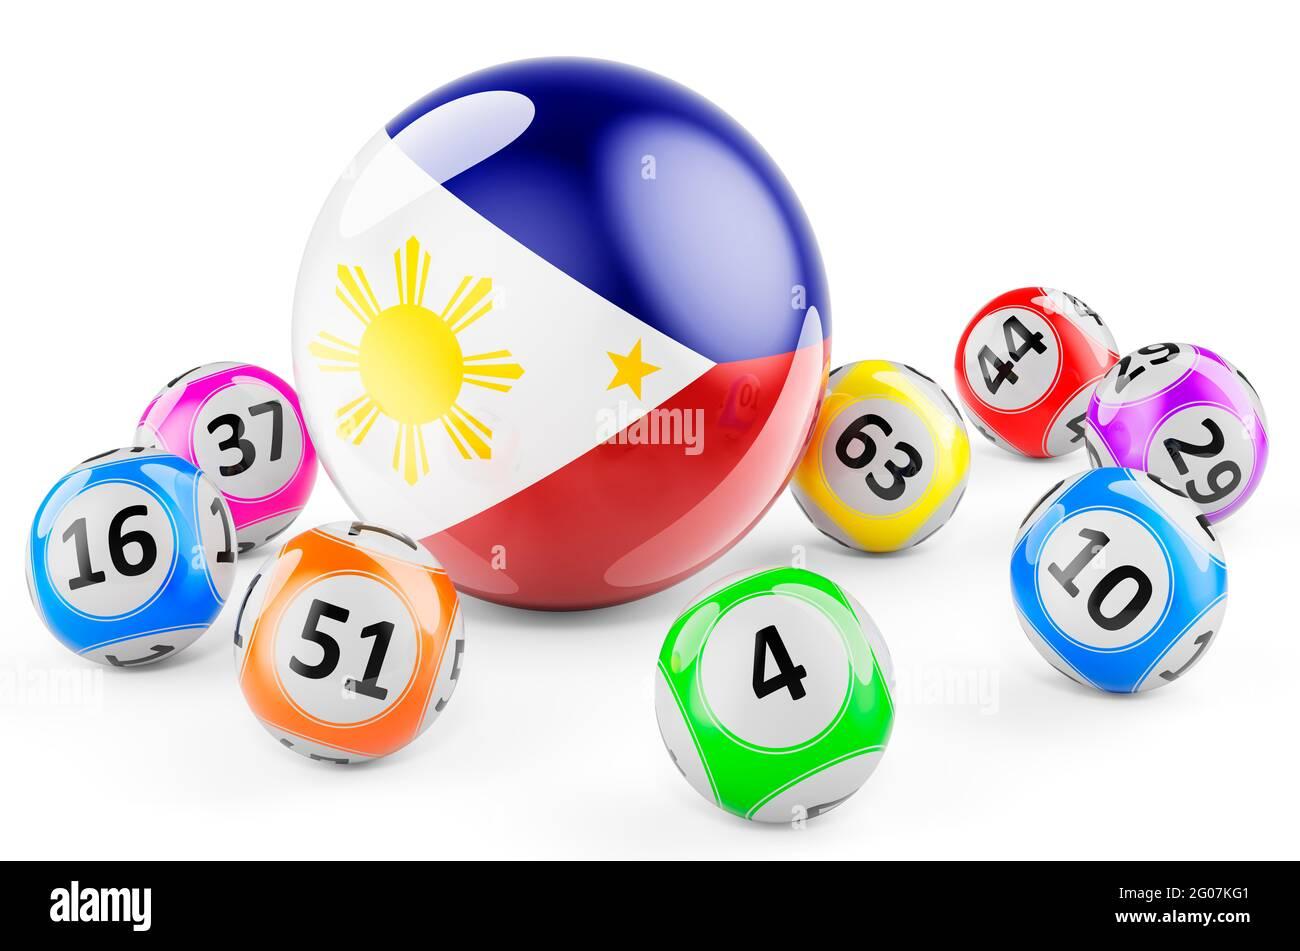 Online Lottery Philippines